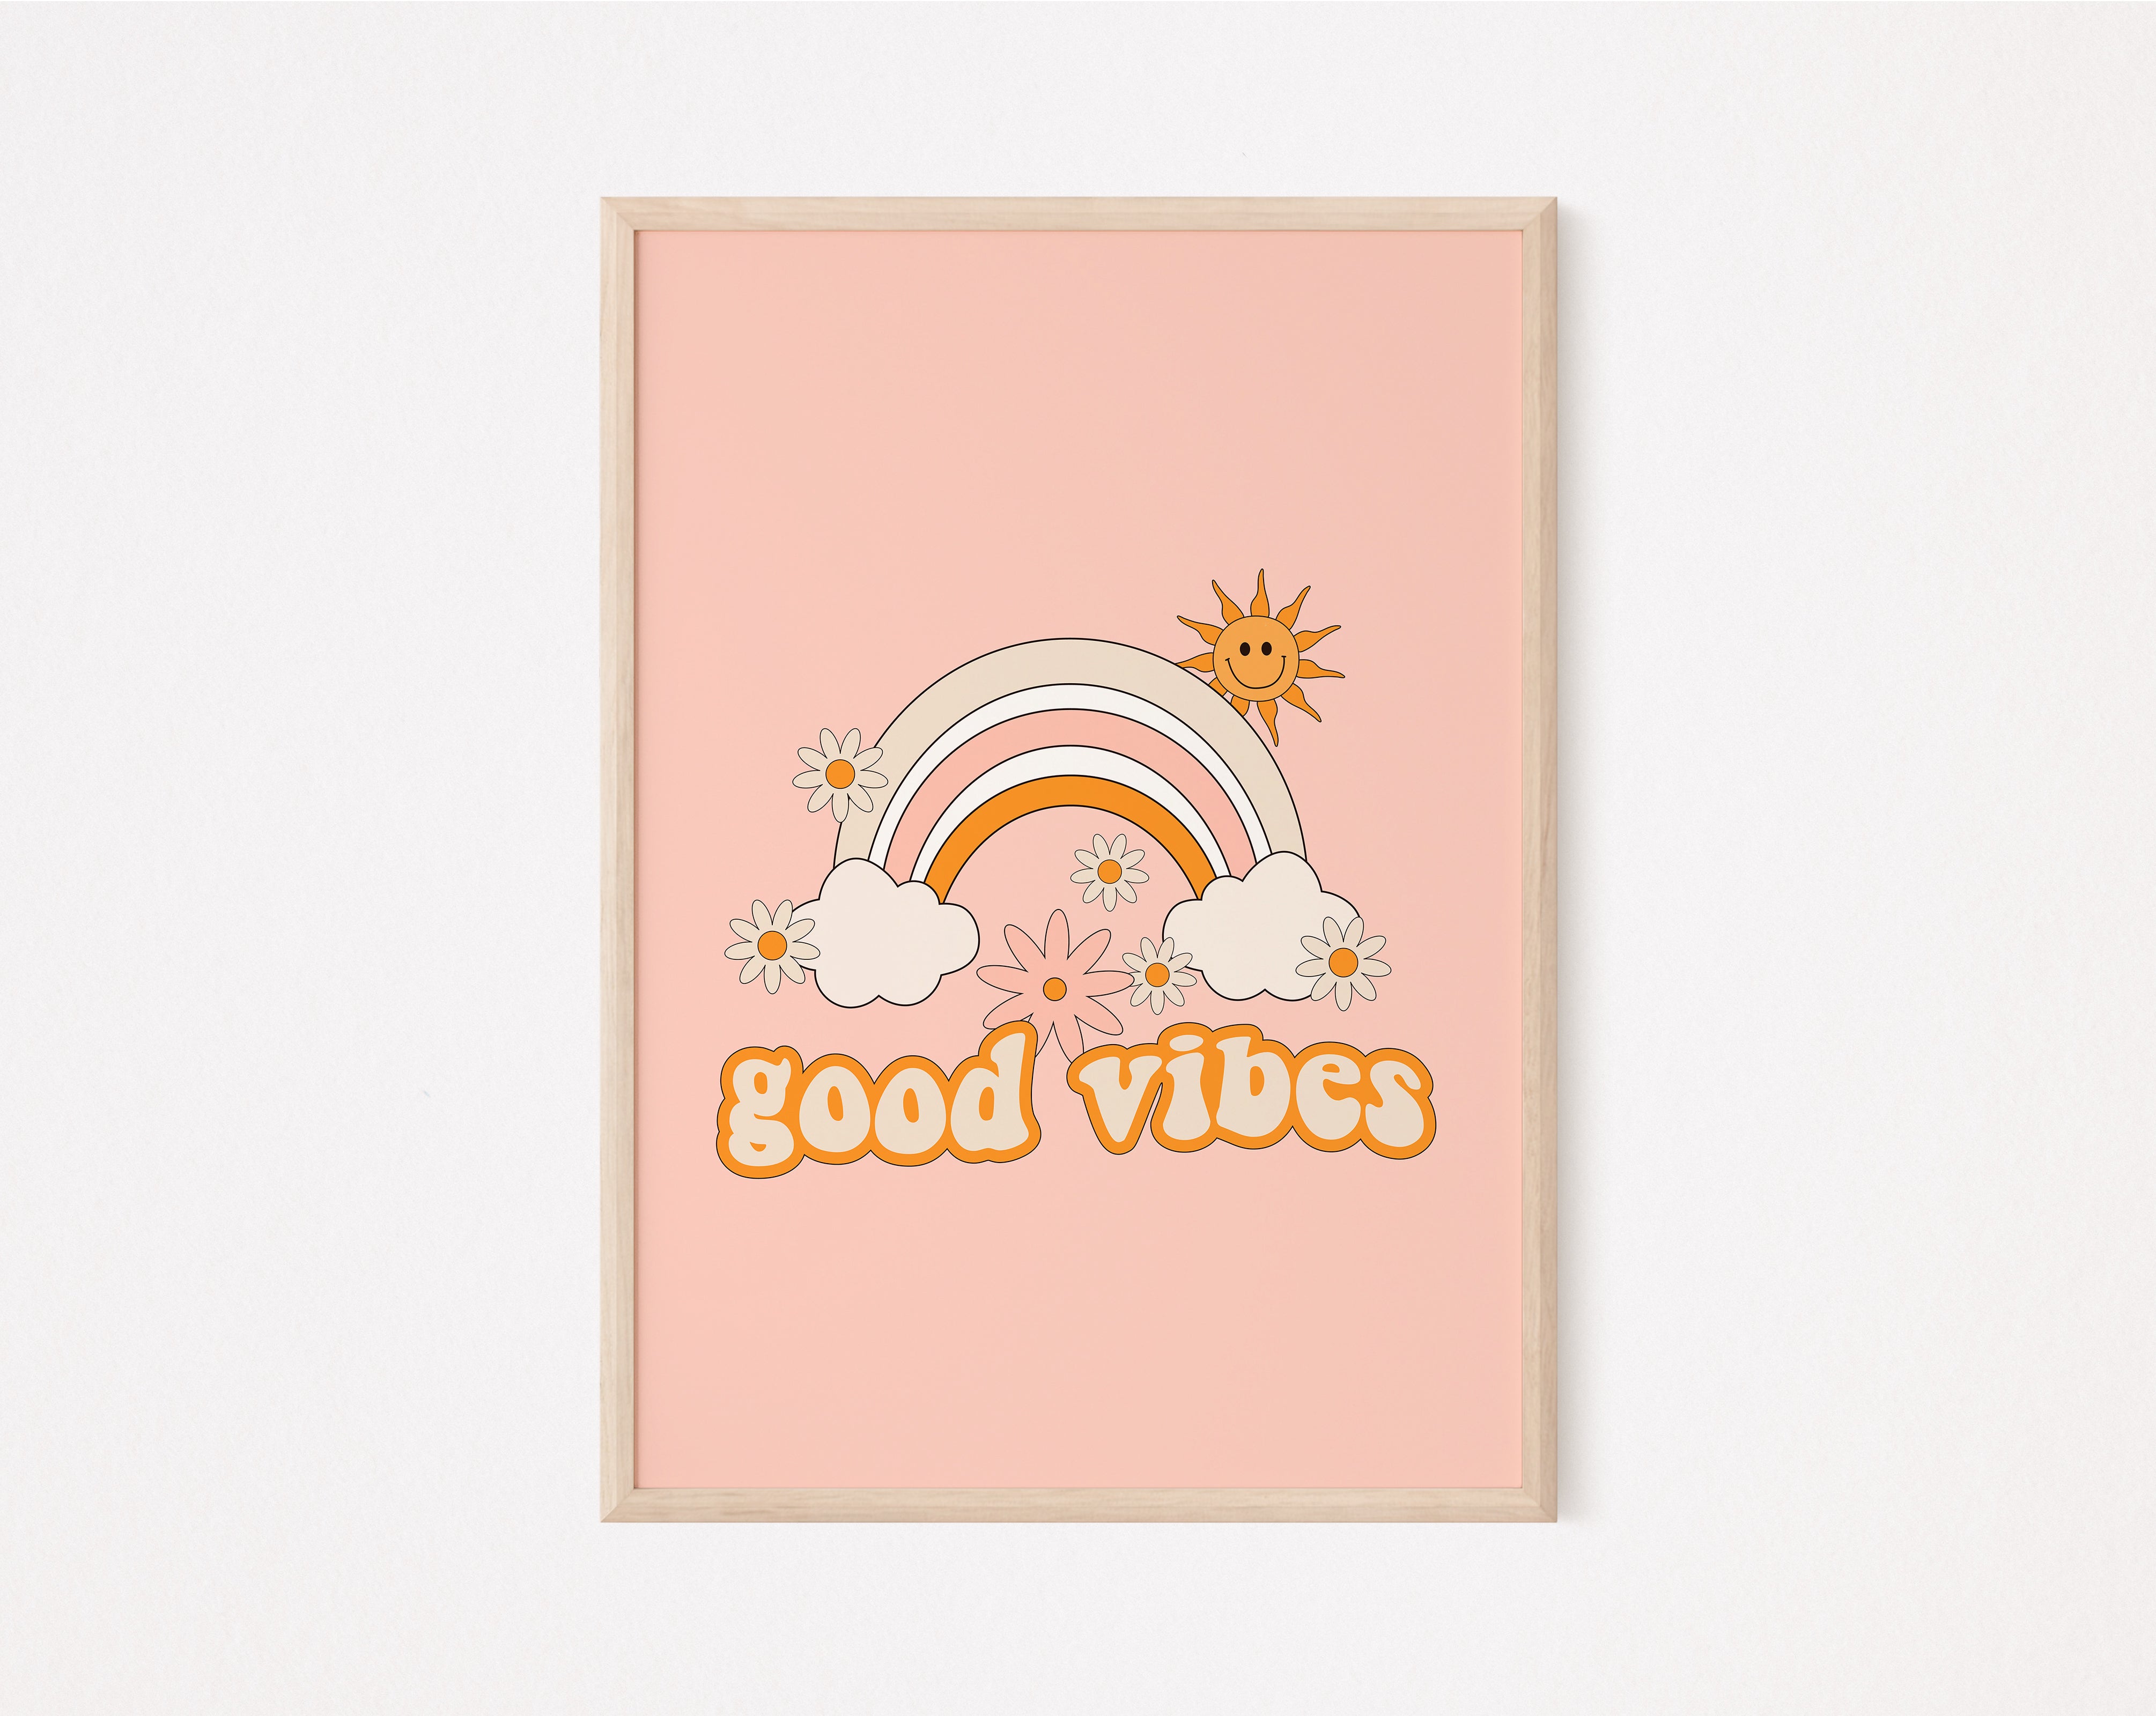 Good vibes – Lolabearboutique